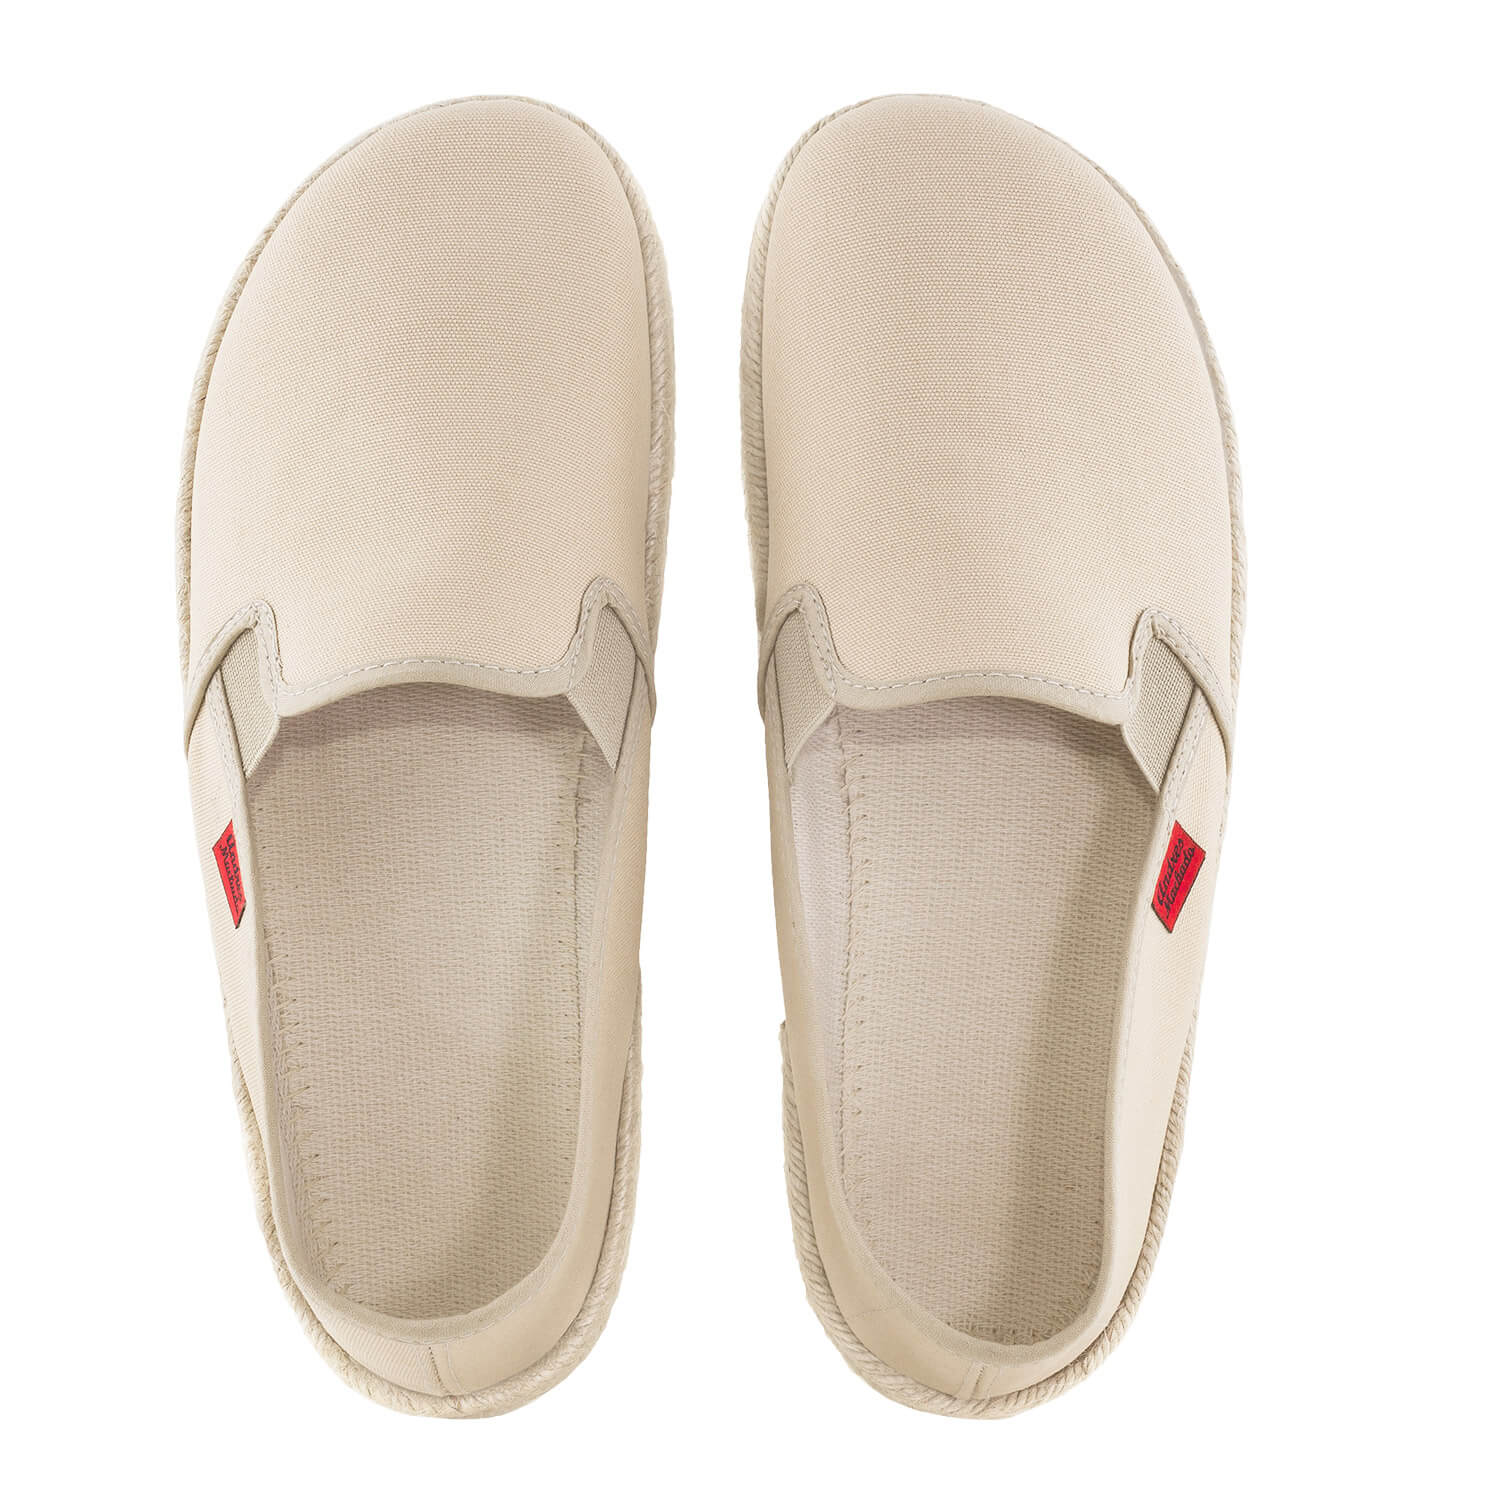 Mythical Beige Canvas Slip-on Shoes with Rubber and Jute Sole 